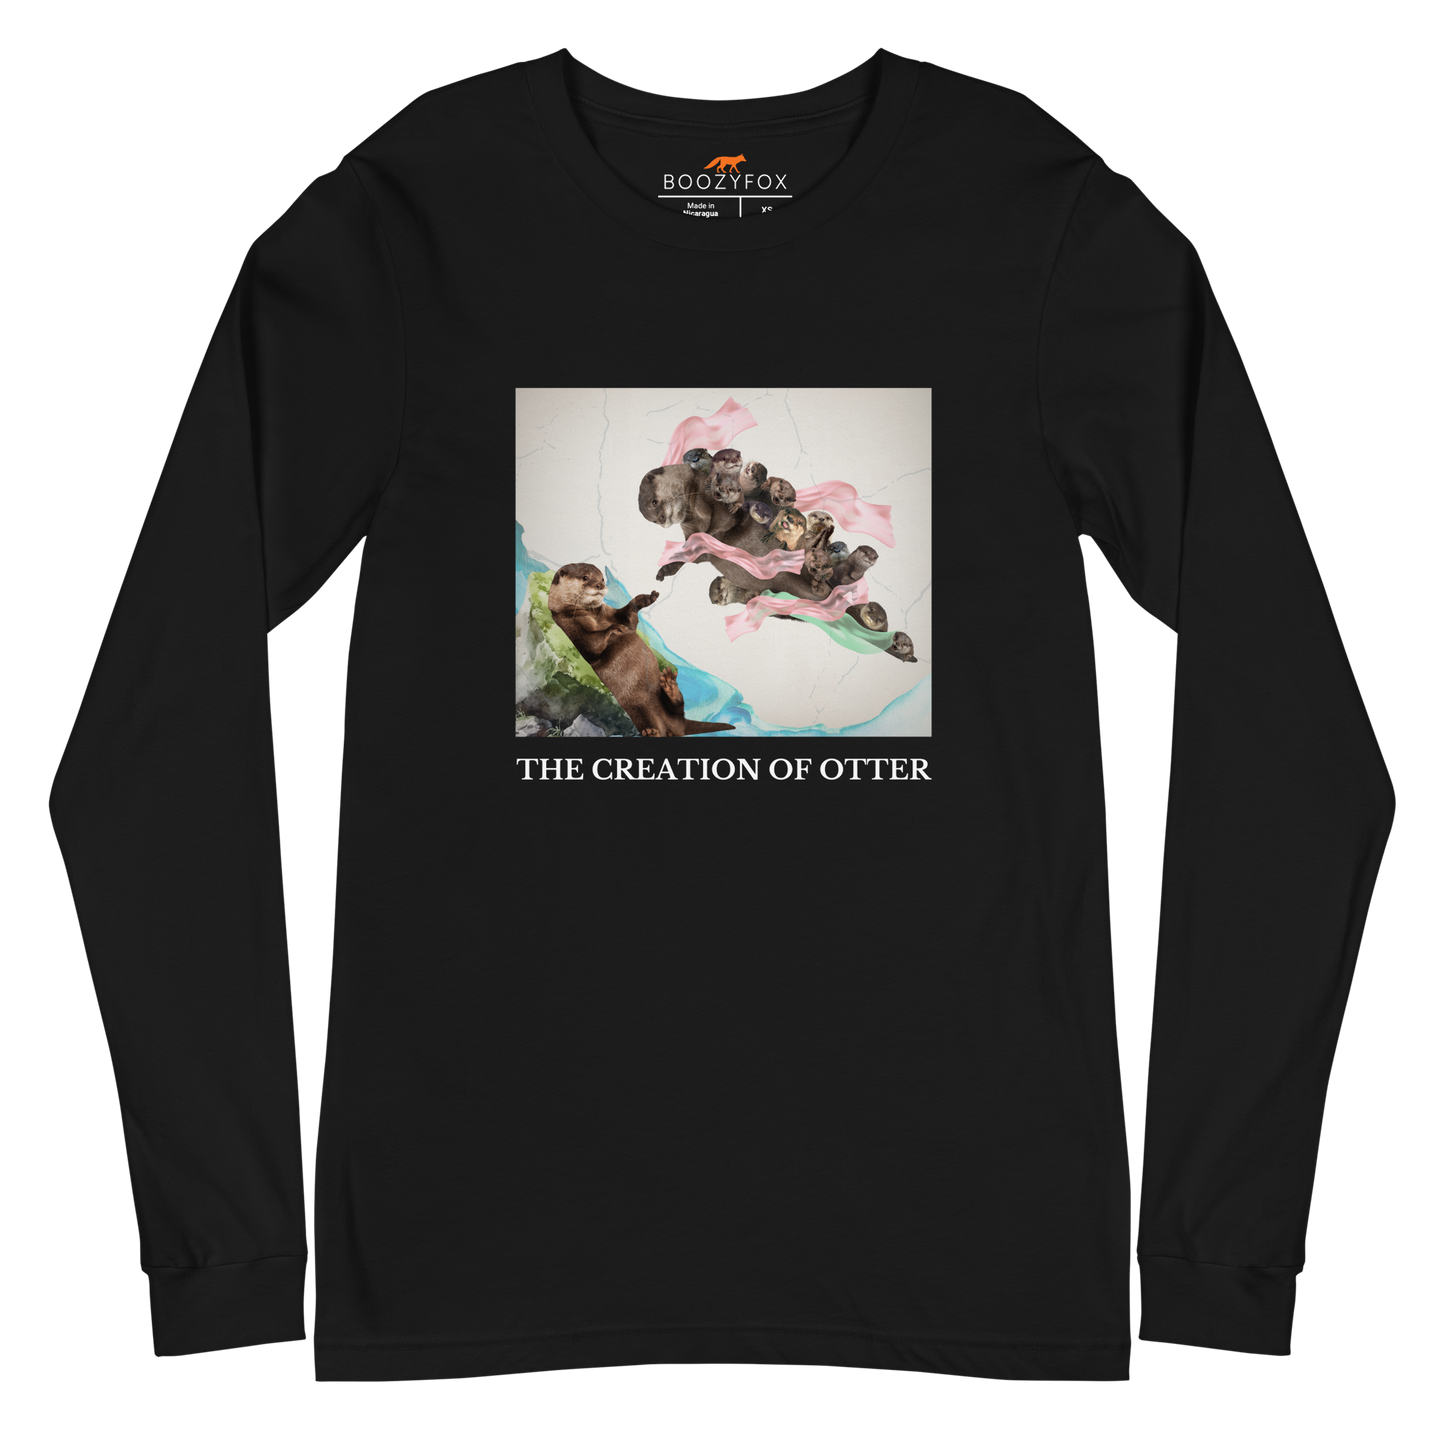 Black Otter Long Sleeve Tee featuring a playful The Creation of Otter parody of Michelangelo's masterpiece - Artsy/Funny Otter Long Sleeve Graphic Tees - Boozy Fox